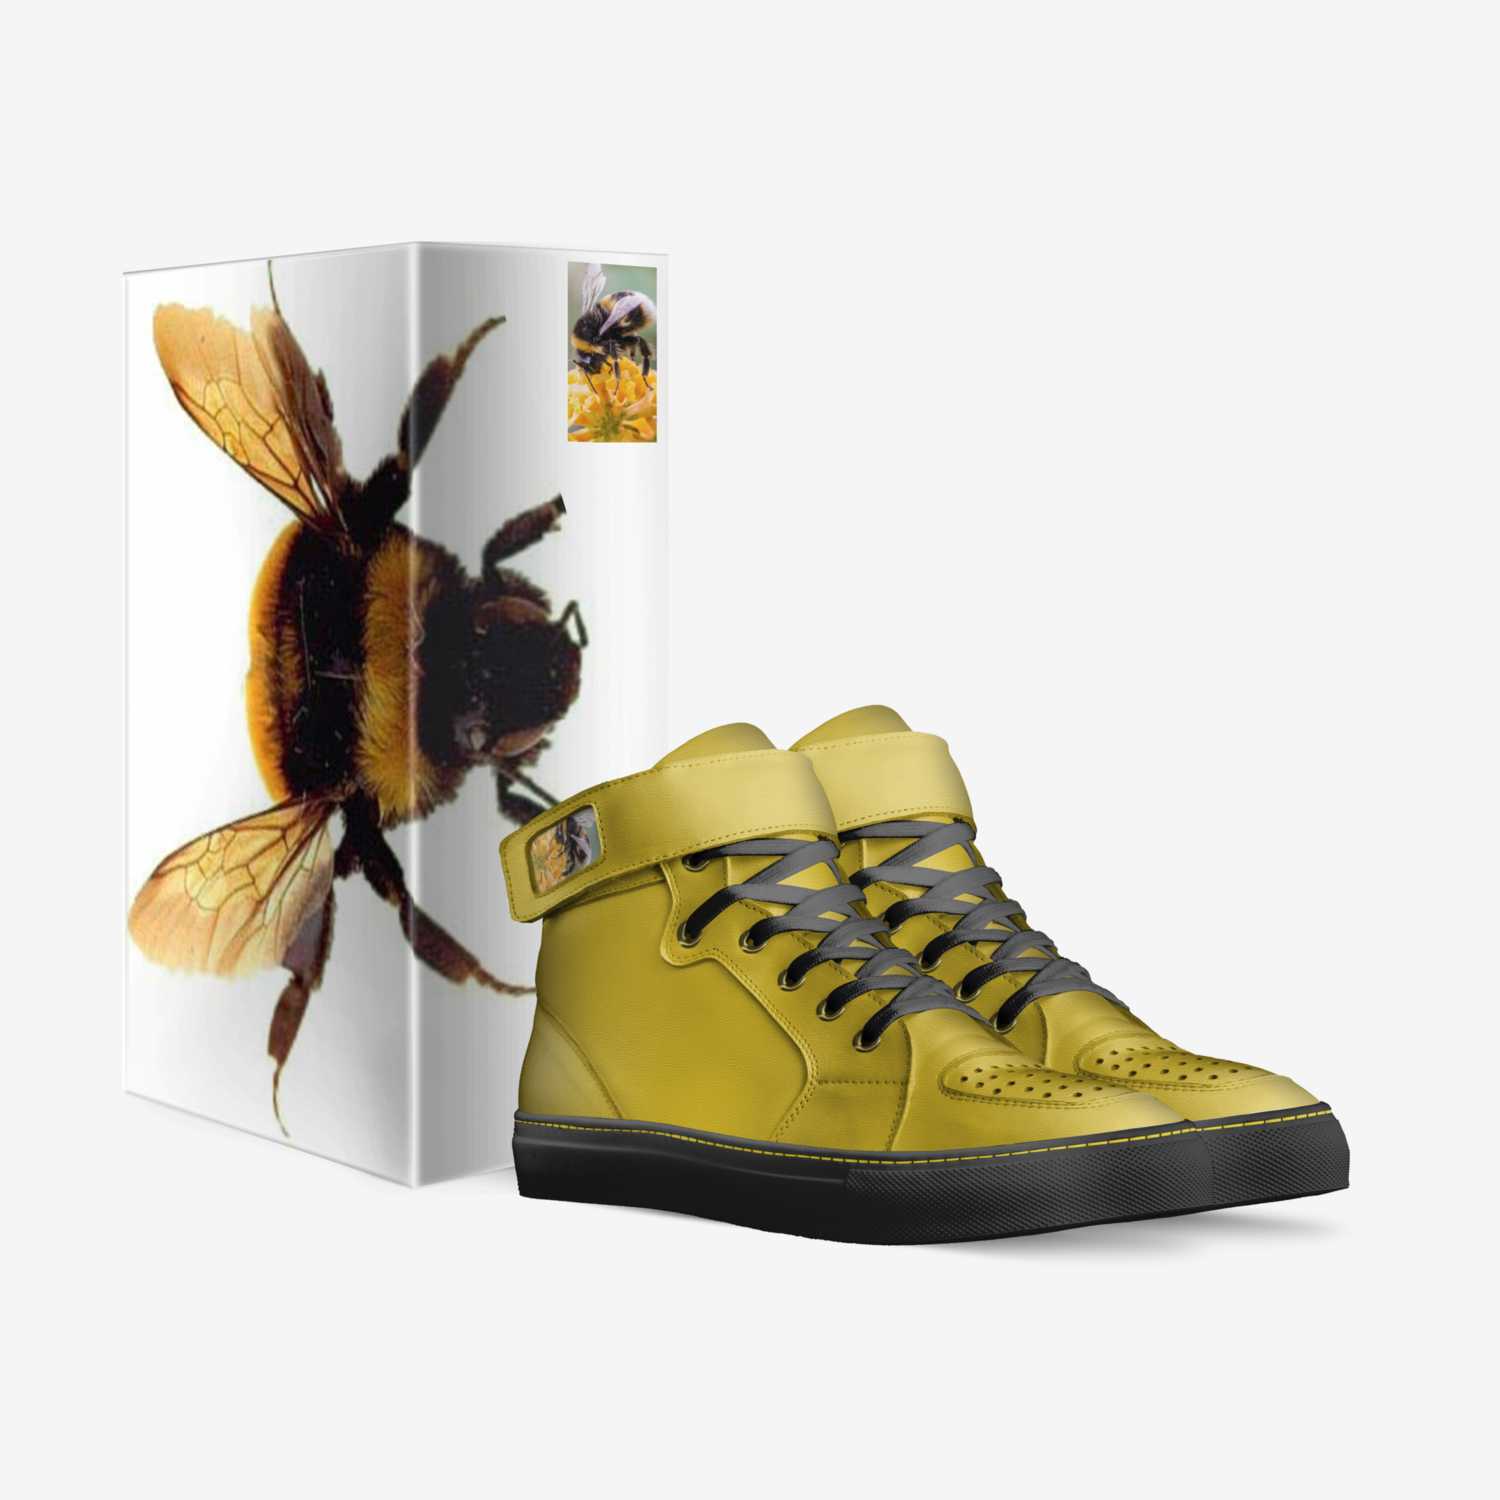 Bumblebees custom made in Italy shoes by Darrius U Will Get Sued For Taking My Ideas Fair Warning | Box view